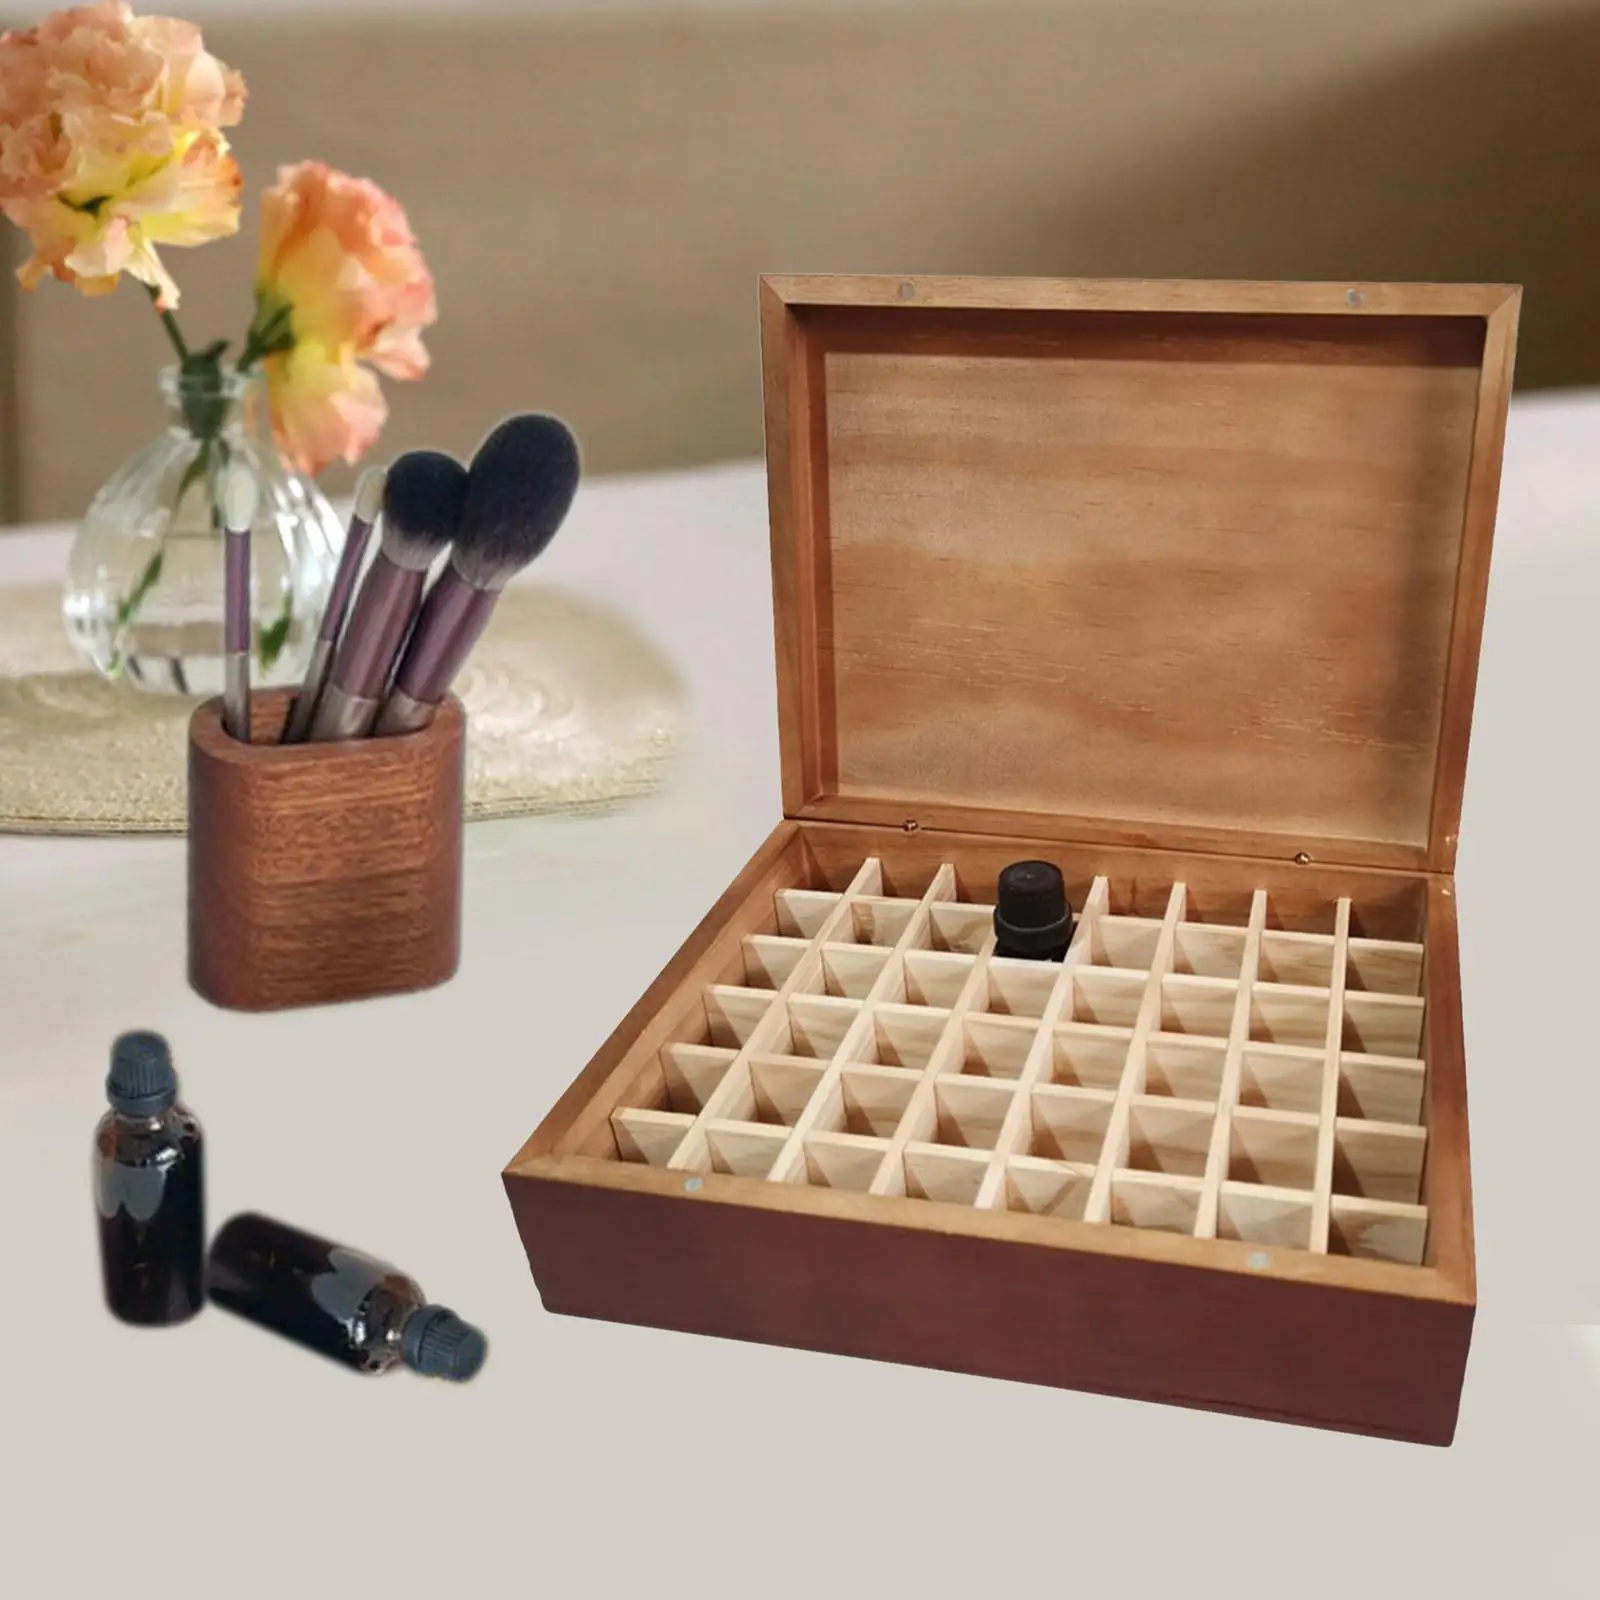 Portable Essential Oil Storage Holder 48 Slots 5ml Carry Organizing Collection Wooden Organizer Box Wooden Container